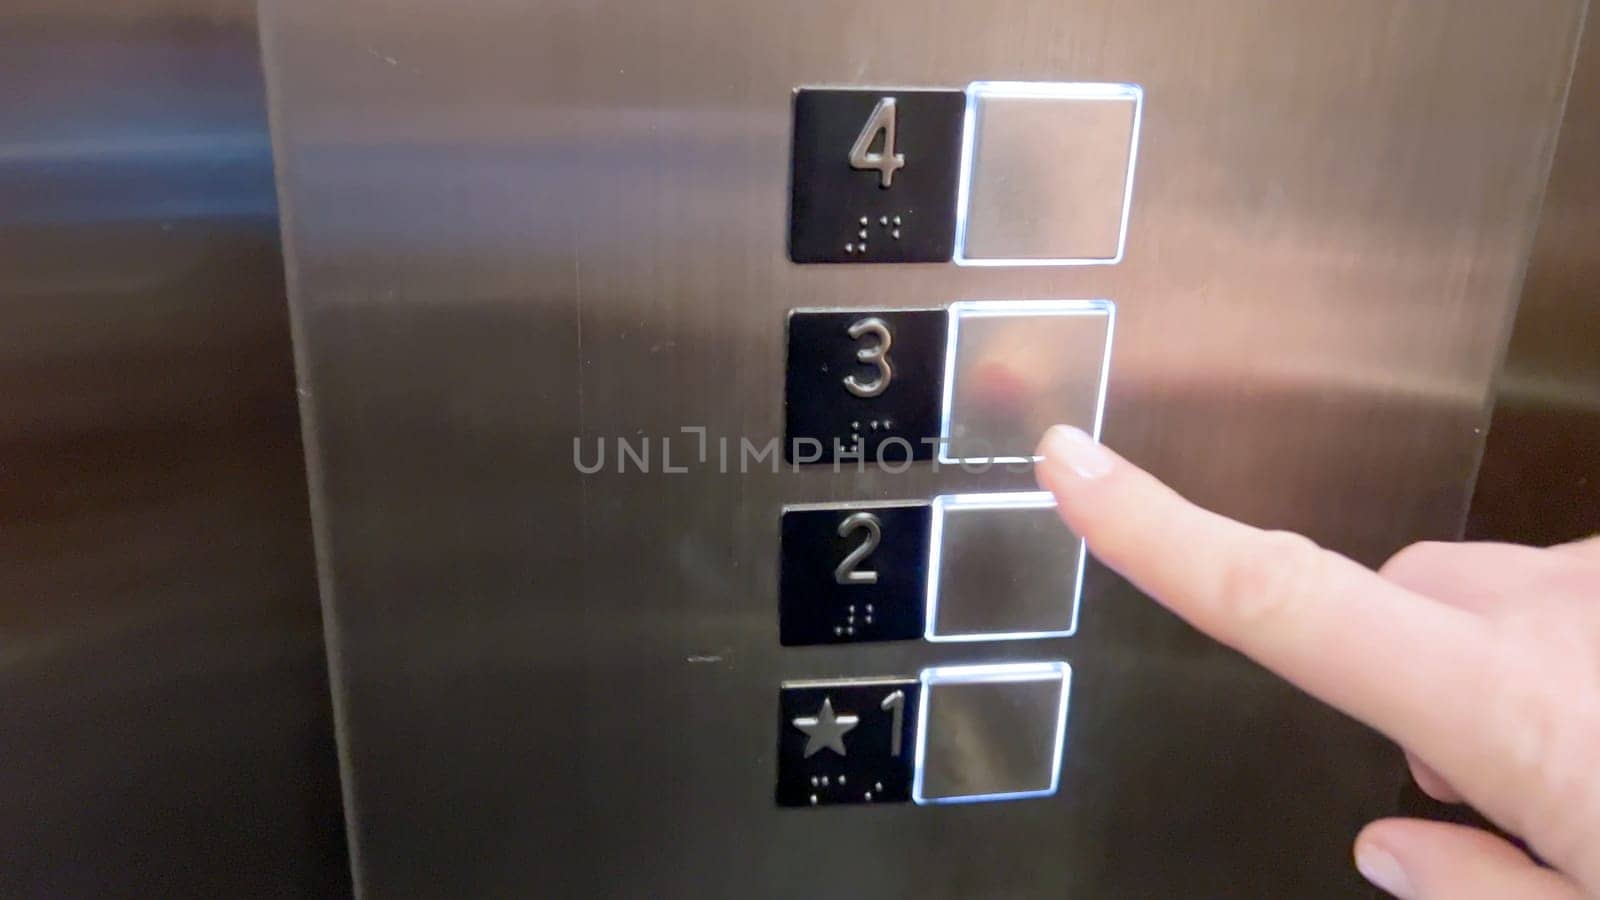 An elevator control panel displaying a set of floor buttons, with the second and third floors highlighted, indicating the current selections made by the users.